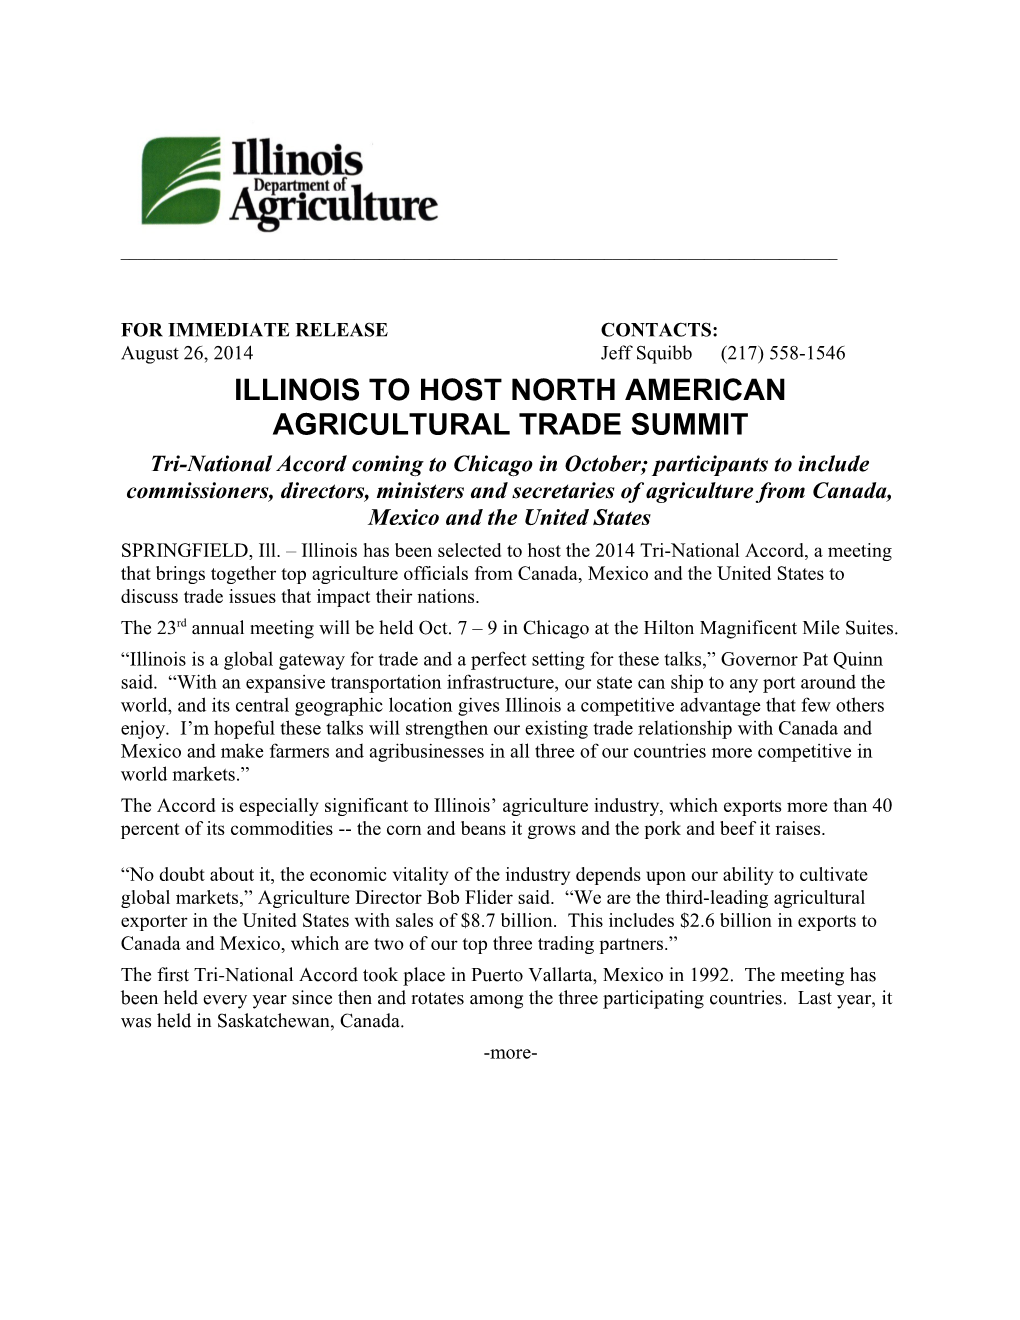 ILLINOIS to HOST NORTH AMERICAN Agricultural TRADE SUMMIT